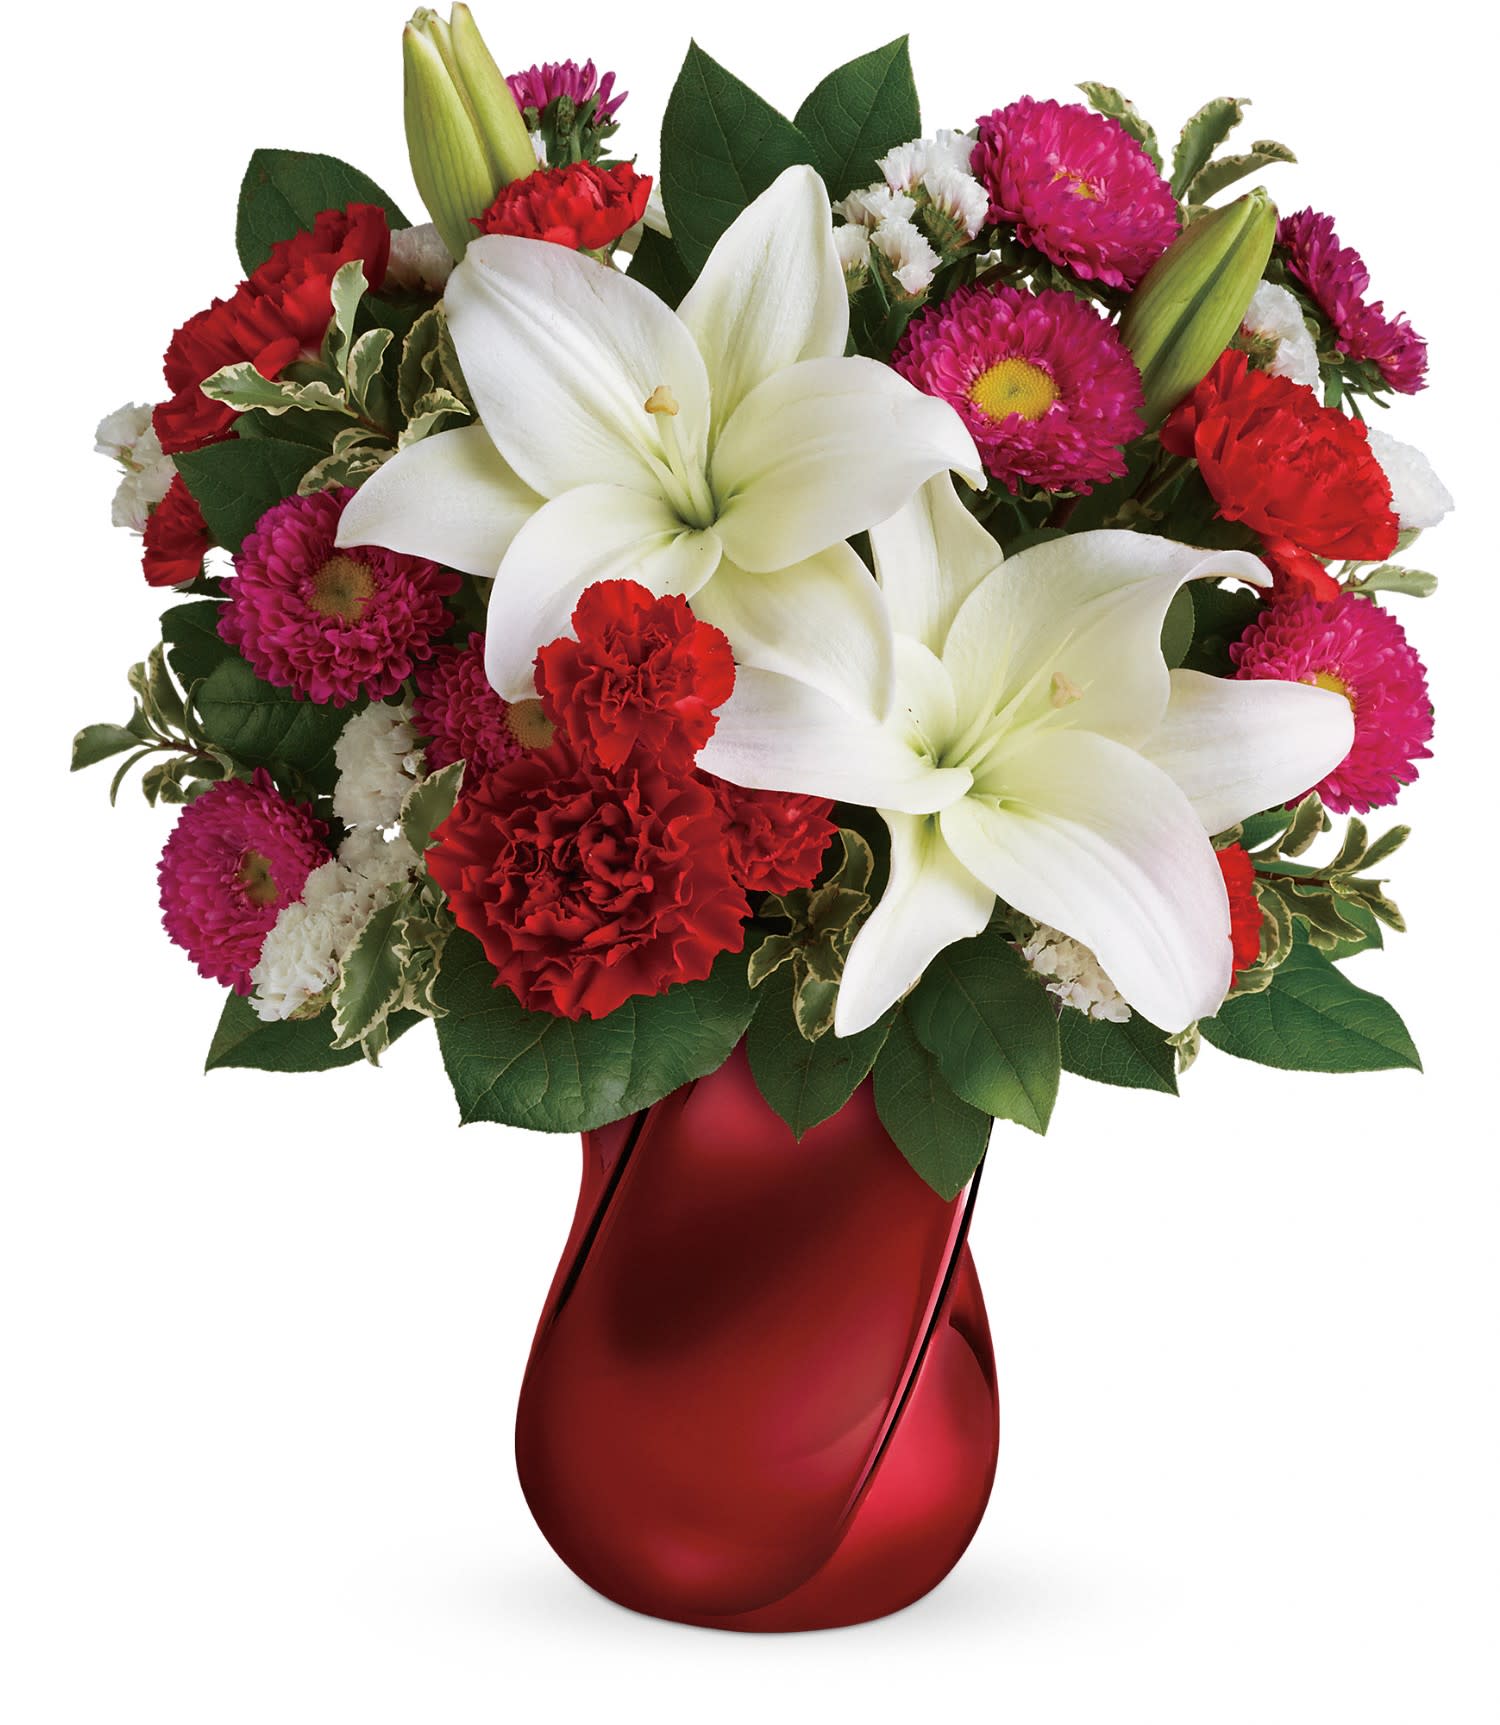 Teleflora's Always There Bouquet - Let them know that you'll always be there with this breathtaking red and white bouquet, hand-delivered in a unique ceramic vase with modern twisted design.